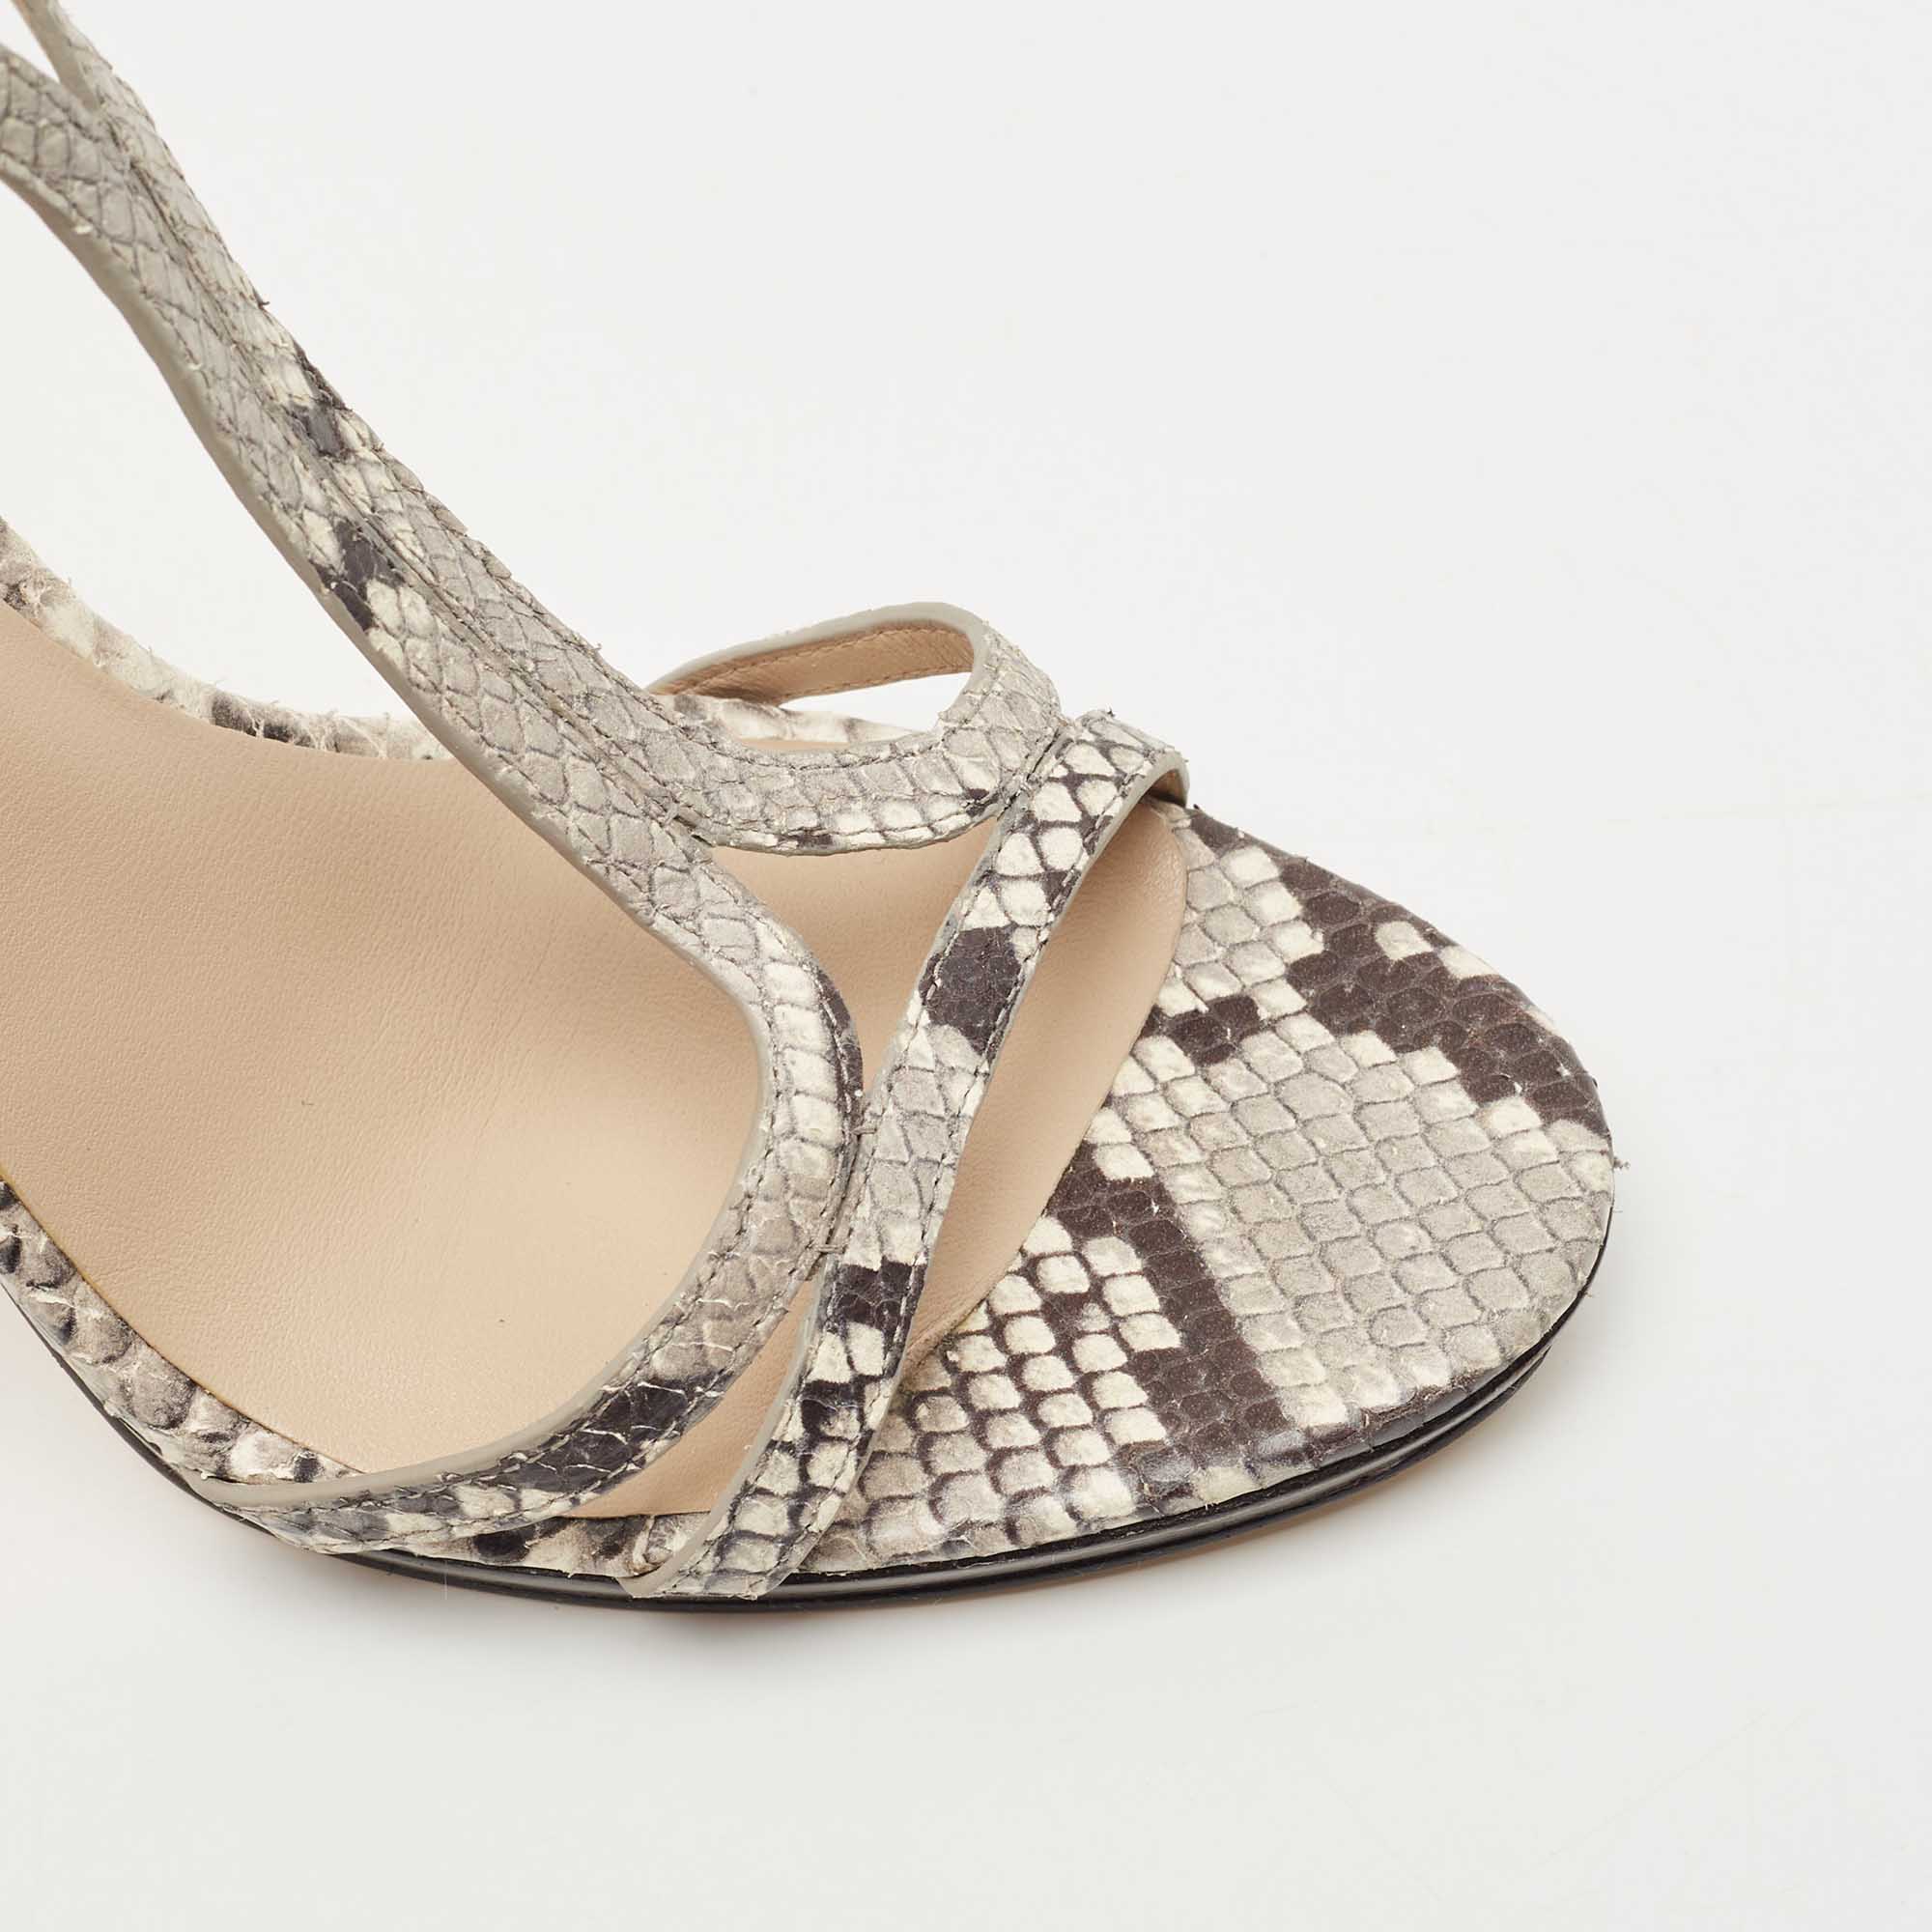 Tory Burch Grey/Black Python Embossed Leather Shelley Sandals Size 38.5